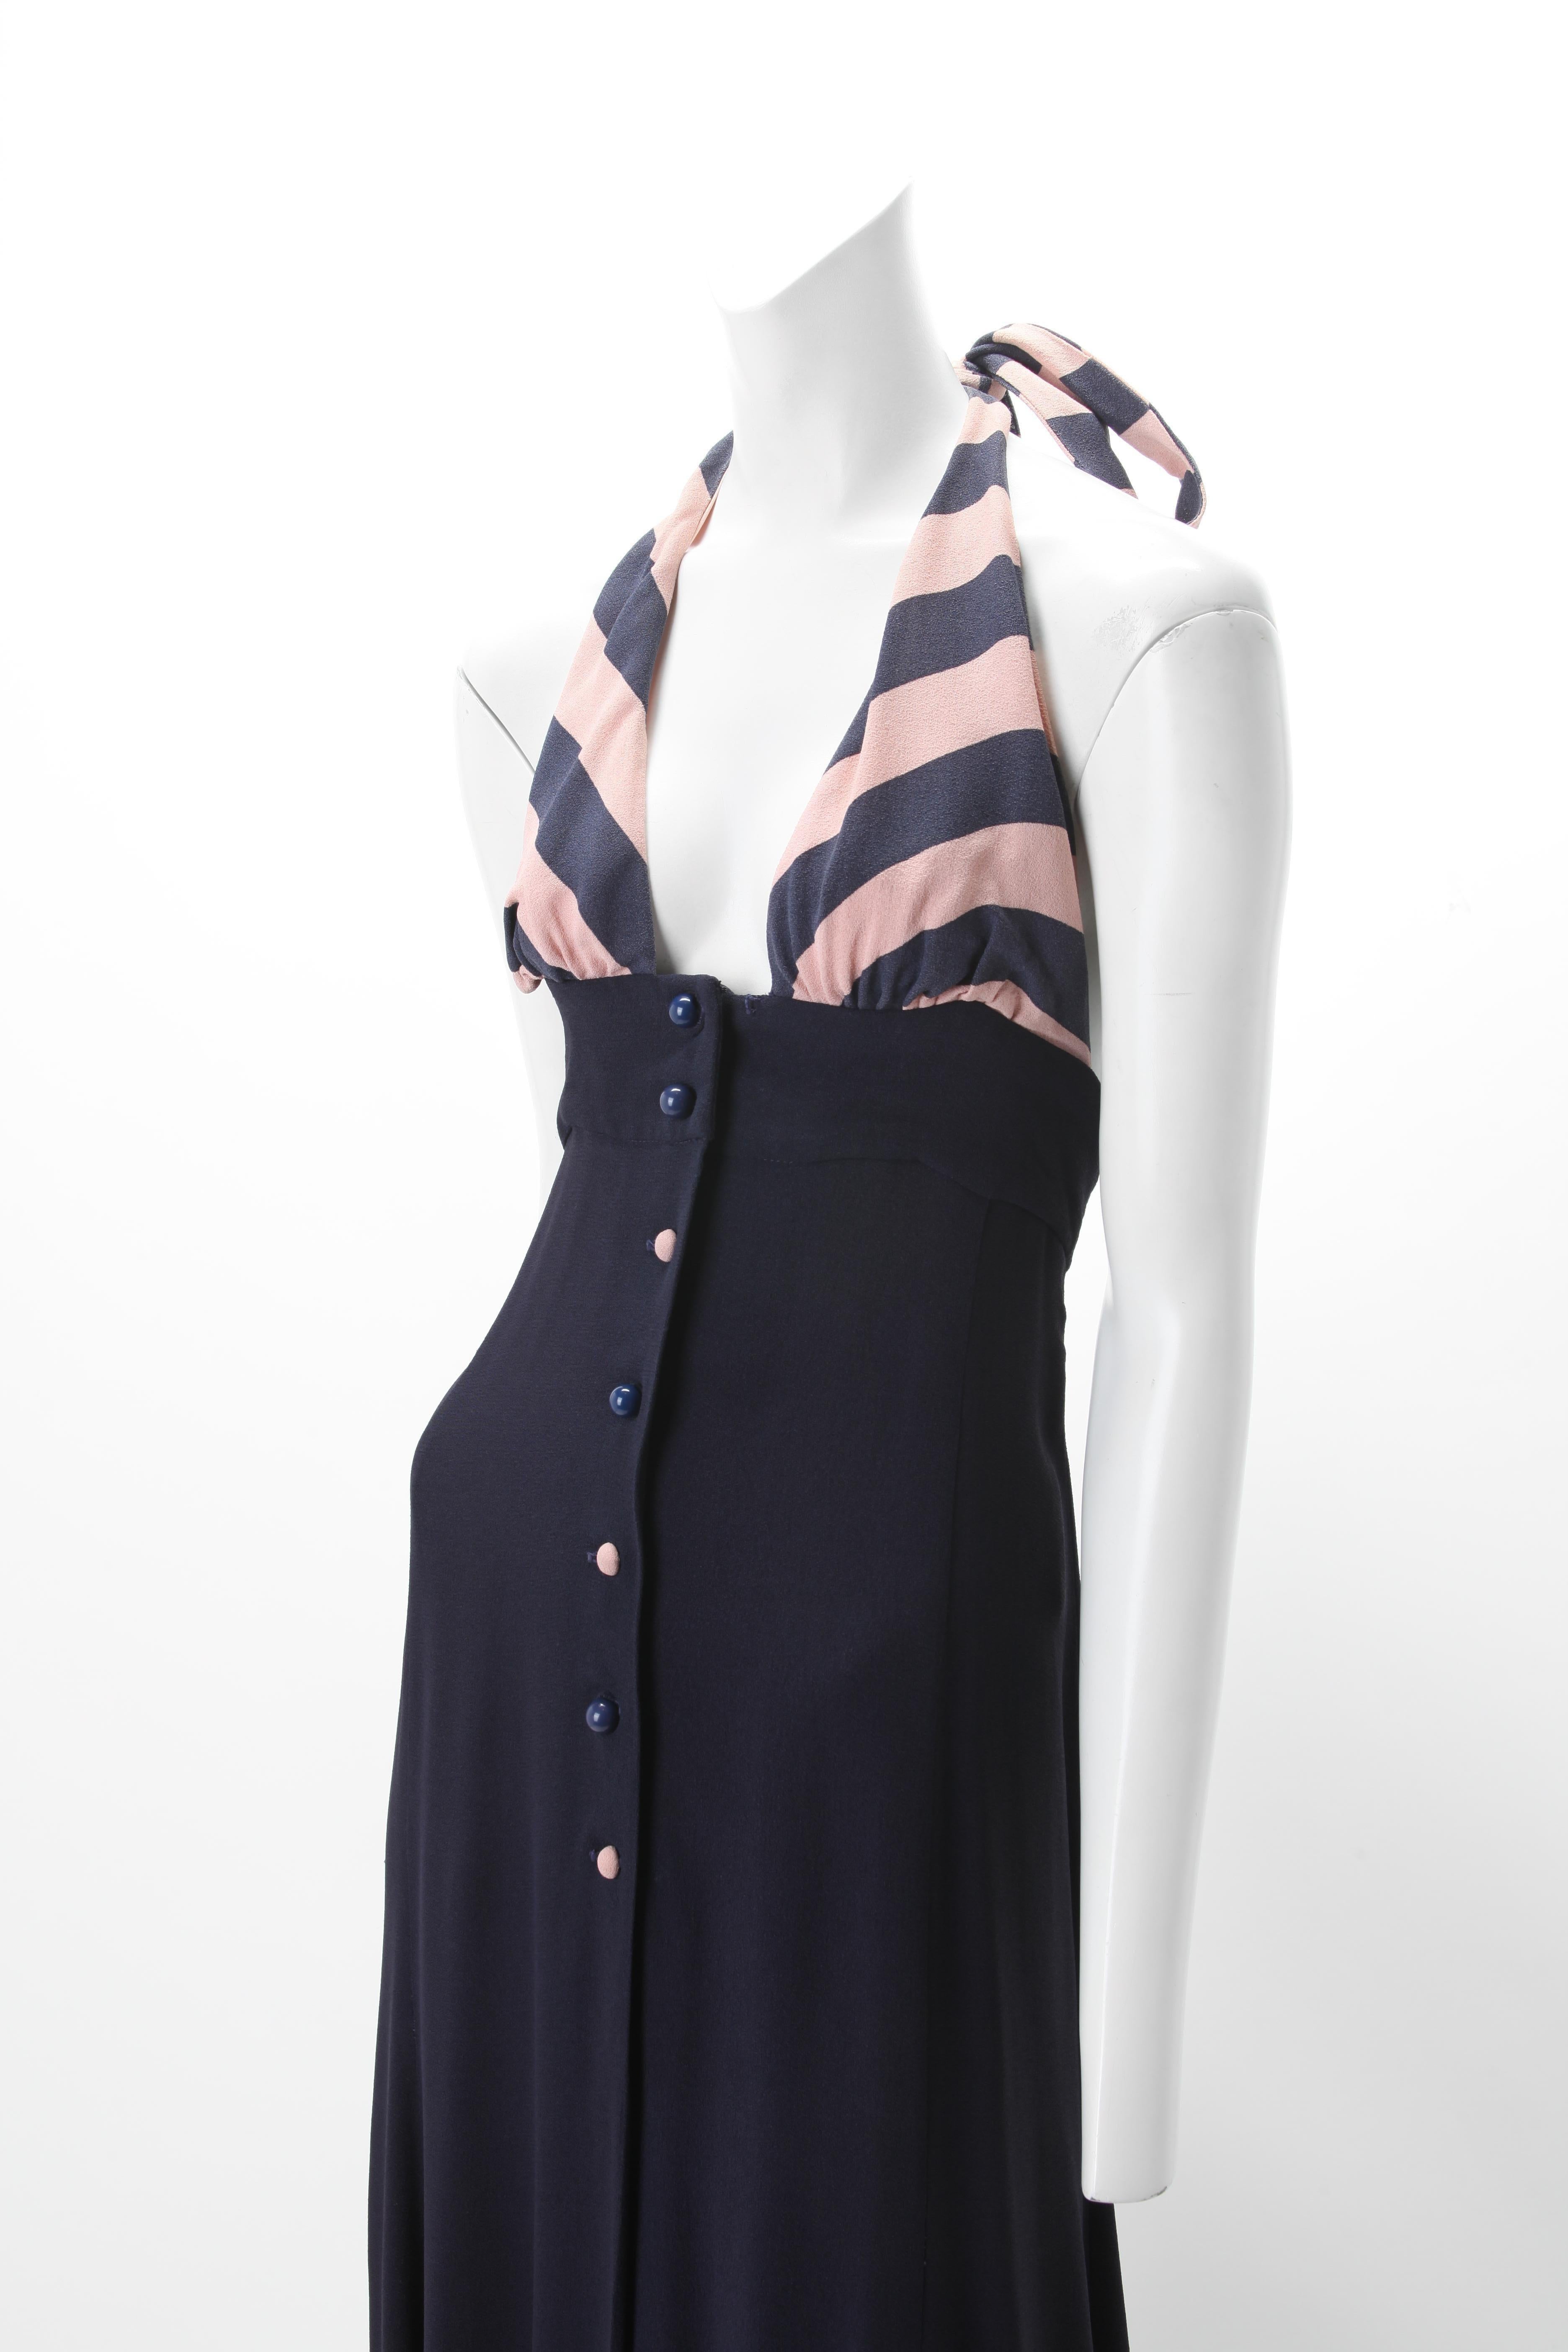 Ossie Clark Celia Birtwell Moss Crepe Halter Dress c. 1970s  UK 34; Navy and Blush Empire Halter Dress with Self Ties at Neck; Matching Center Front Button Closure.